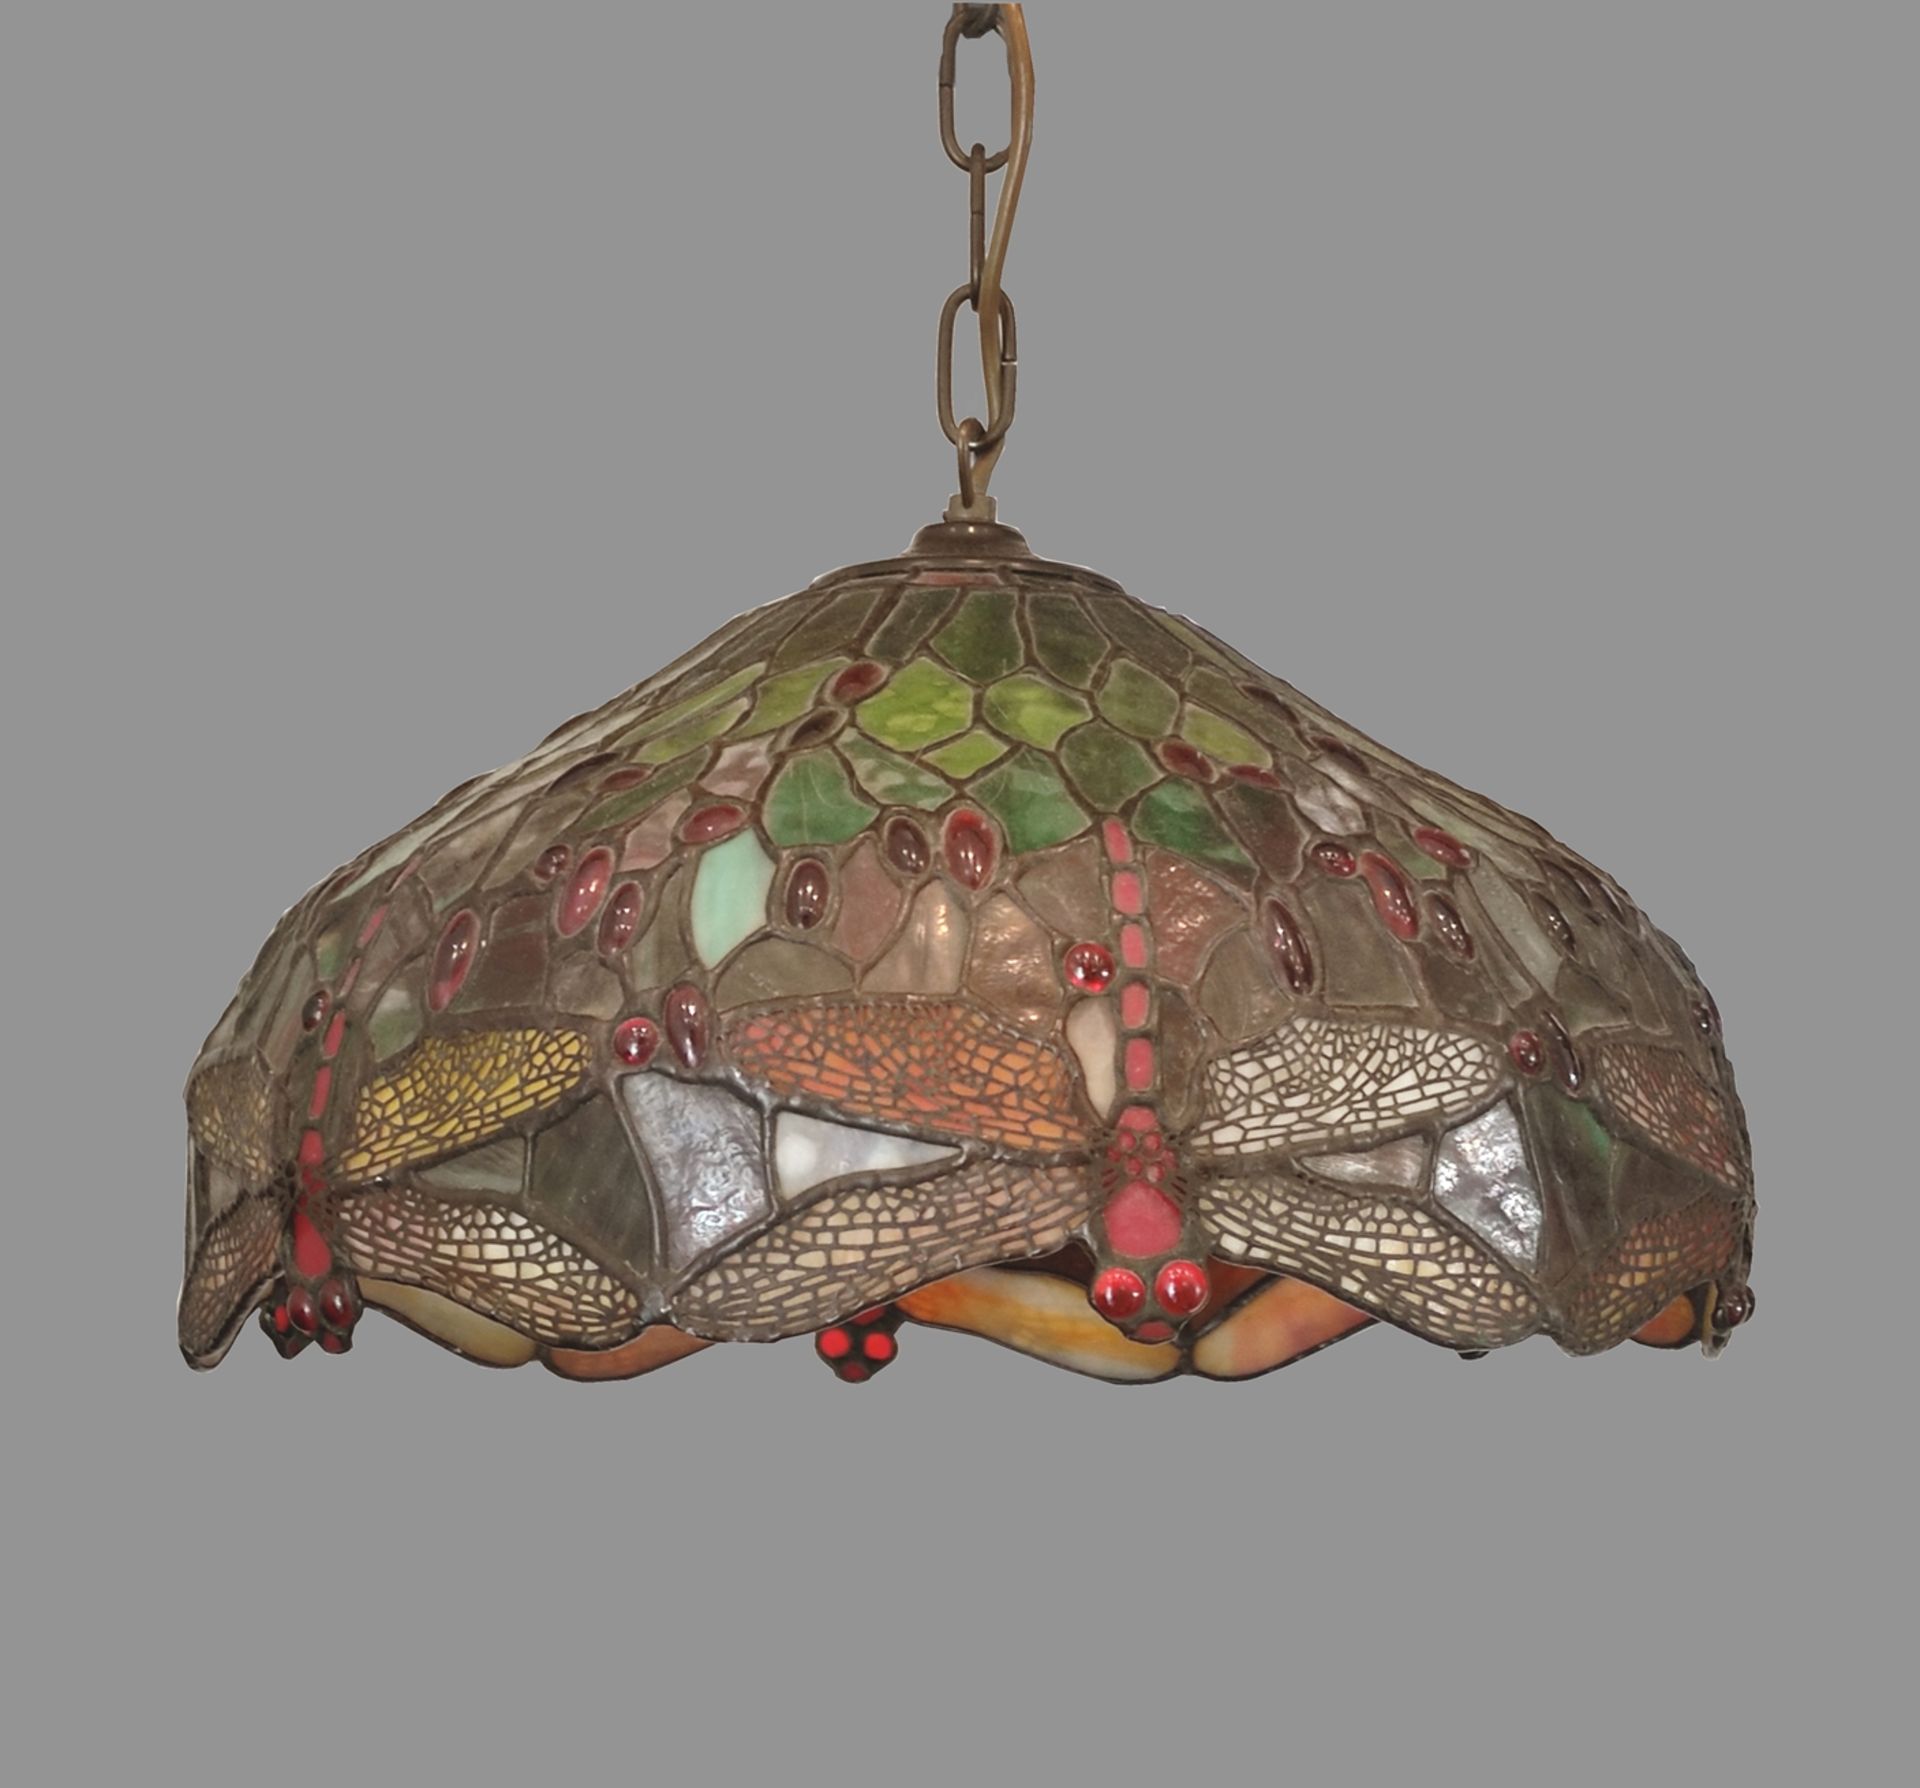 Tiffany-style lamp, Herne glass, lampshade decorated with dragonflies, diameter 43cm, function not